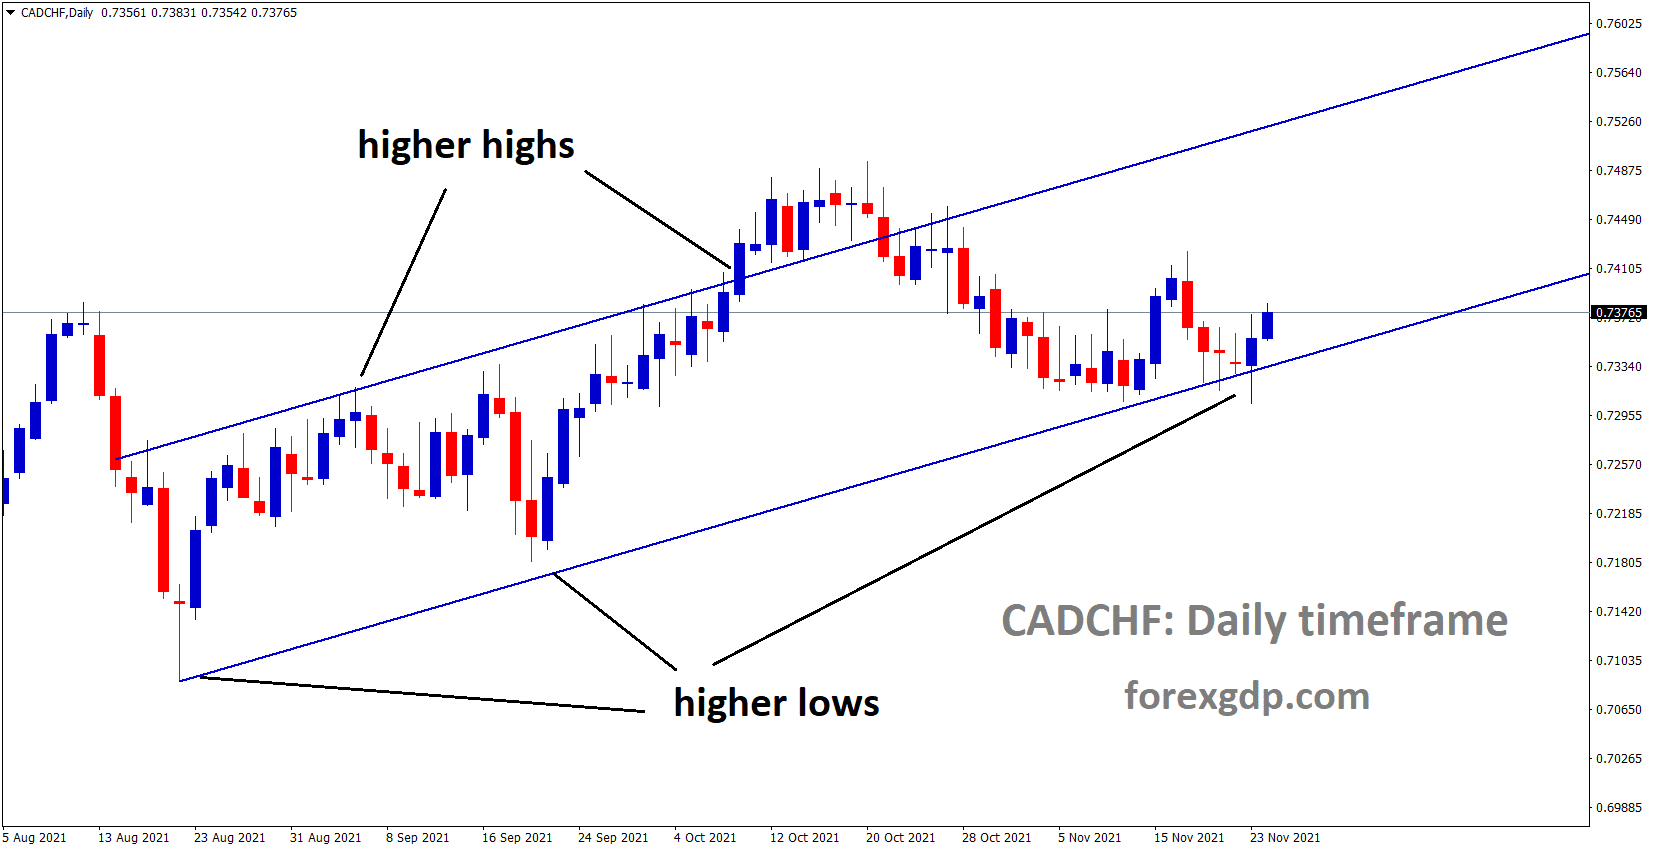 CADCHF is moving in an Ascending channel and the market has rebounded from a higher low area.